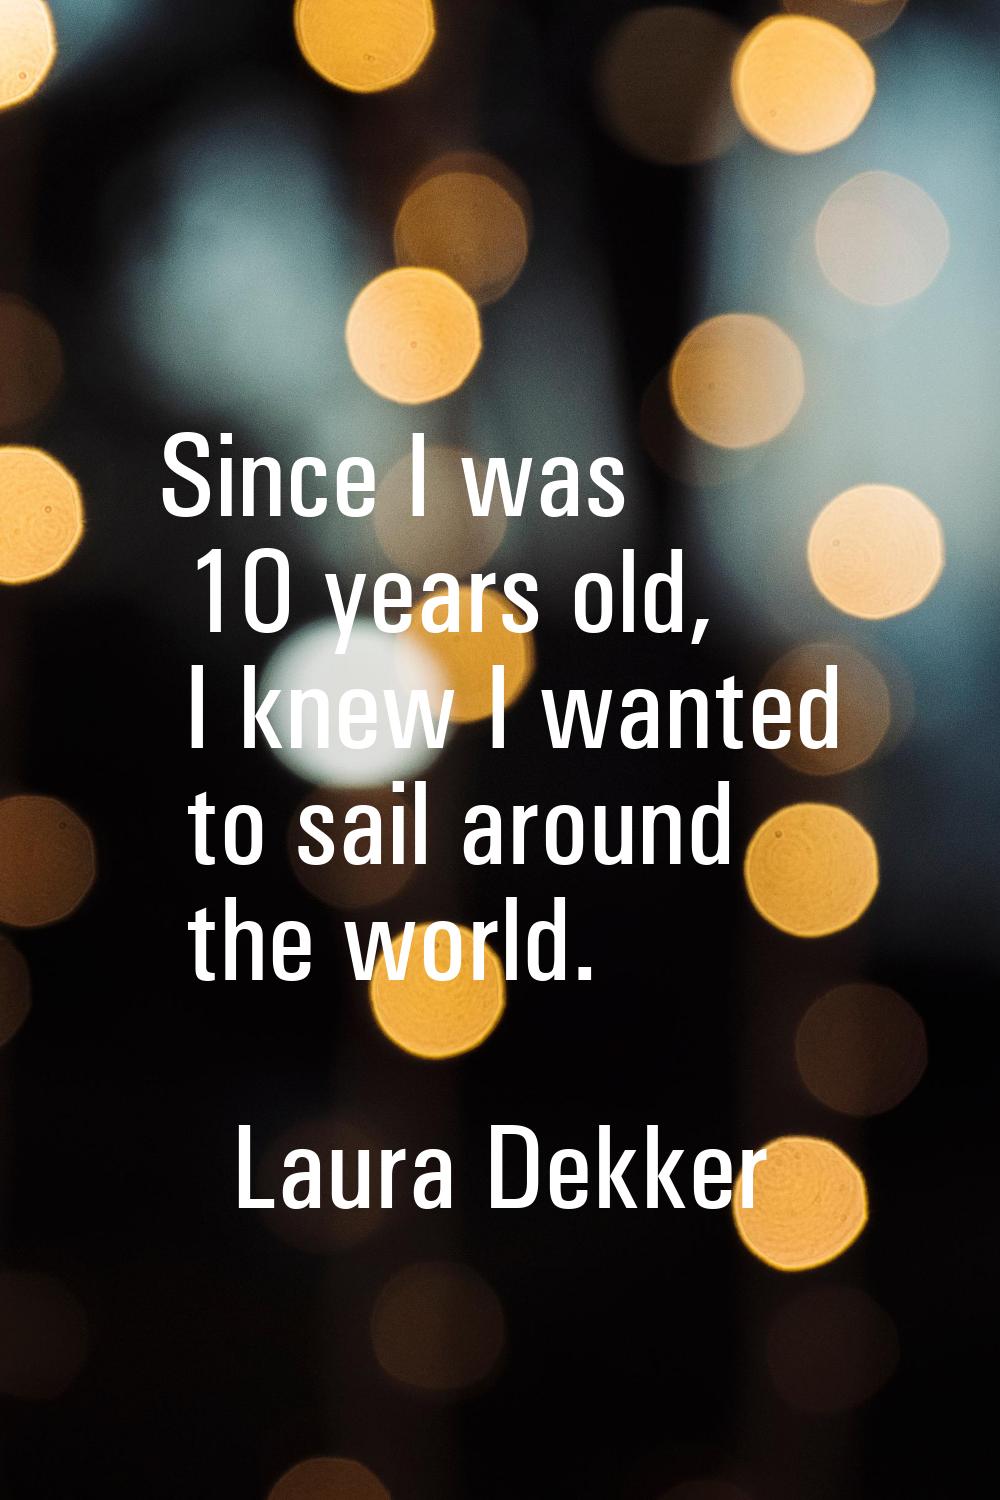 Since I was 10 years old, I knew I wanted to sail around the world.